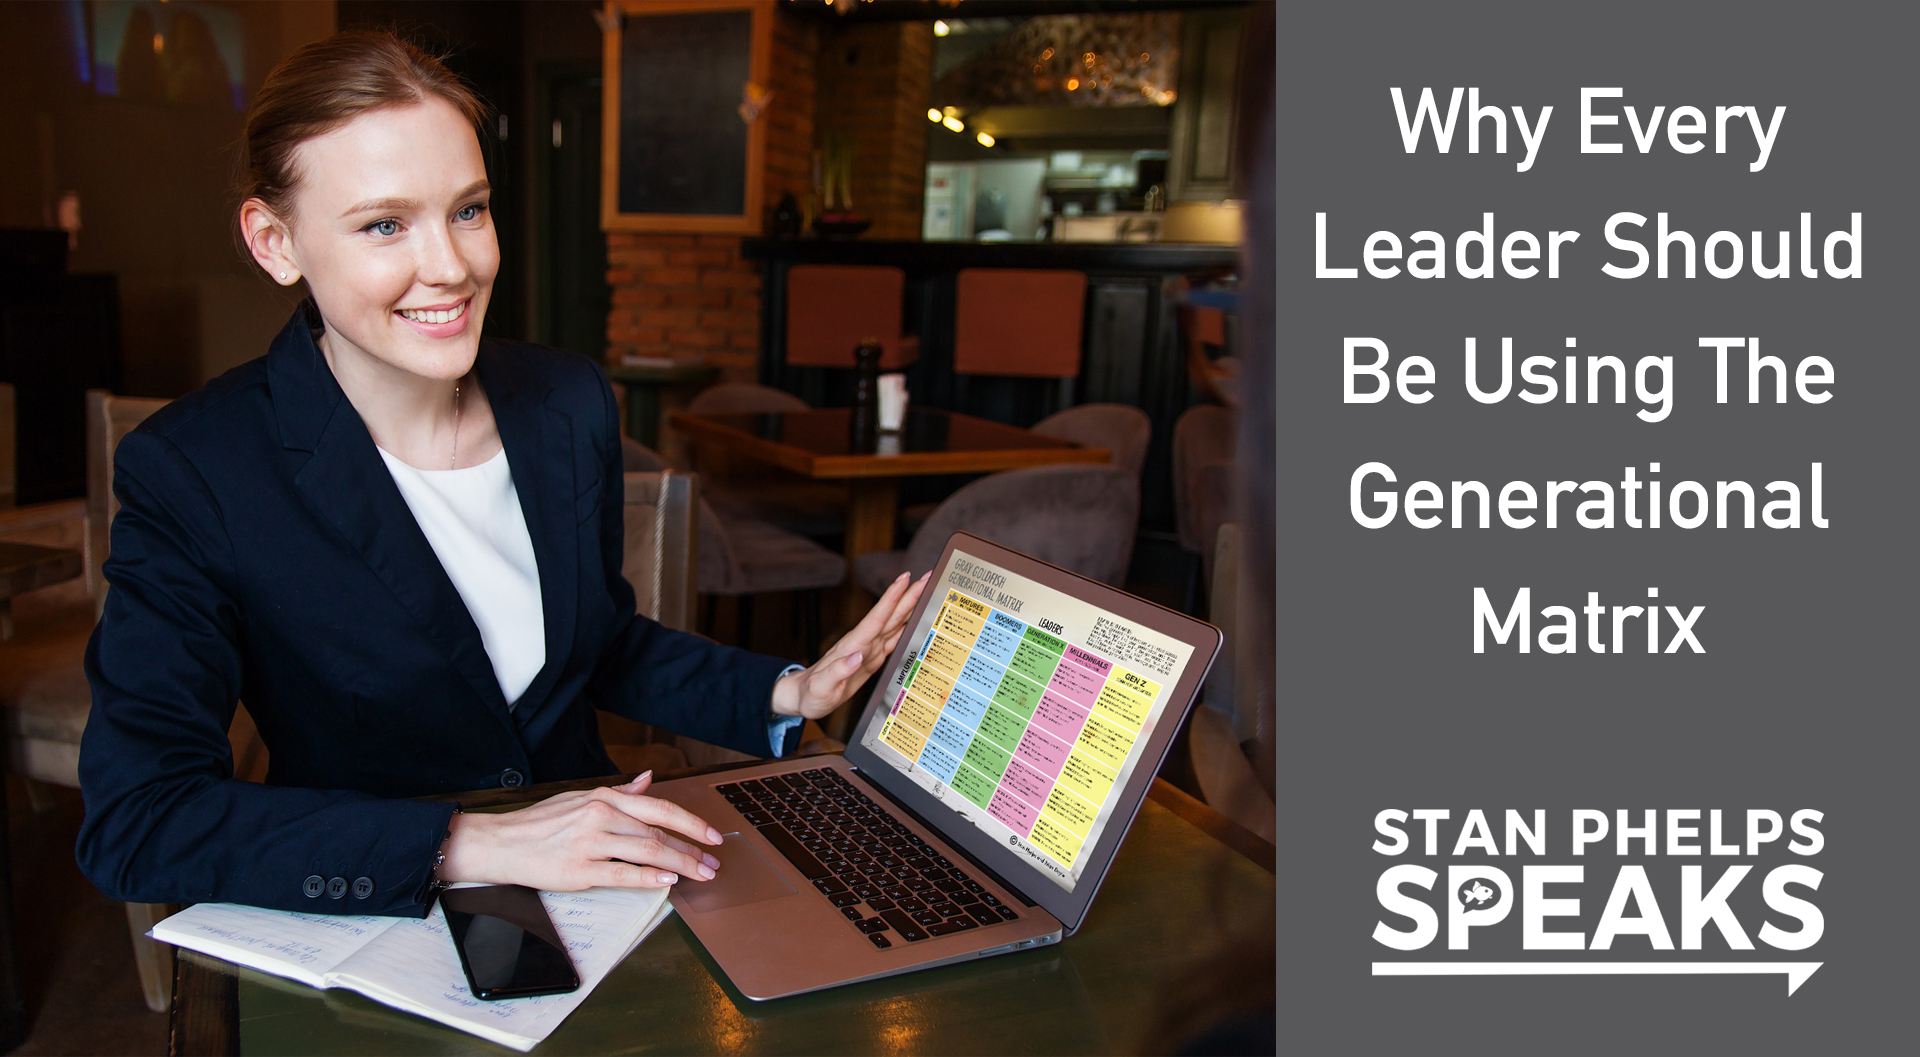 Why Every Leader Should Be Using The Generational Matrix